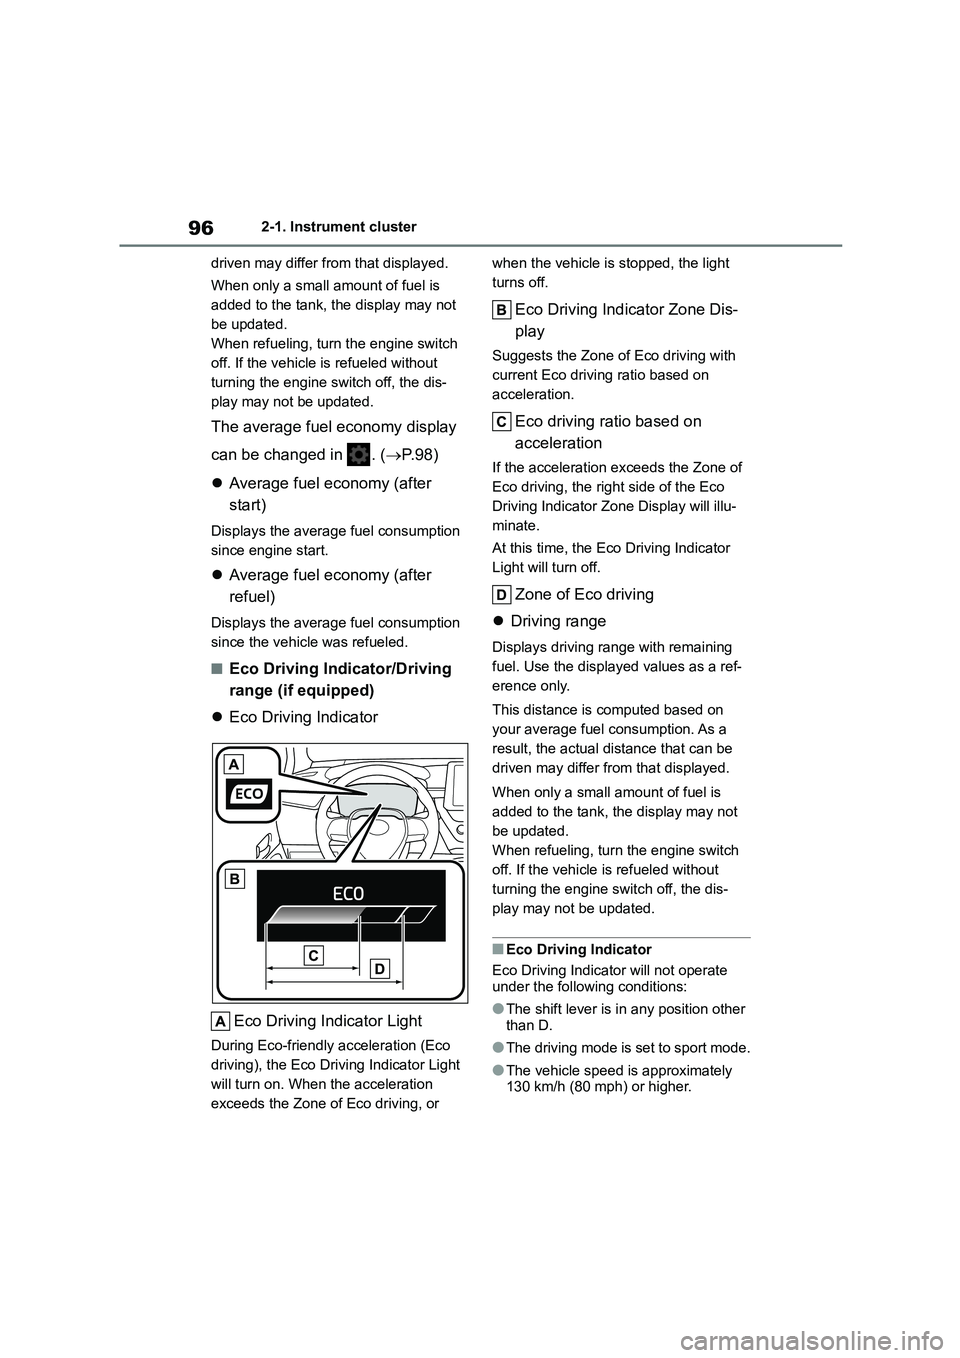 TOYOTA COROLLA 2022  Owners Manual (in English) 962-1. Instrument cluster 
driven may differ from that displayed. 
When only a small amount of fuel is  
added to the tank, the display may not 
be updated.
When refueling, turn the engine switch 
off